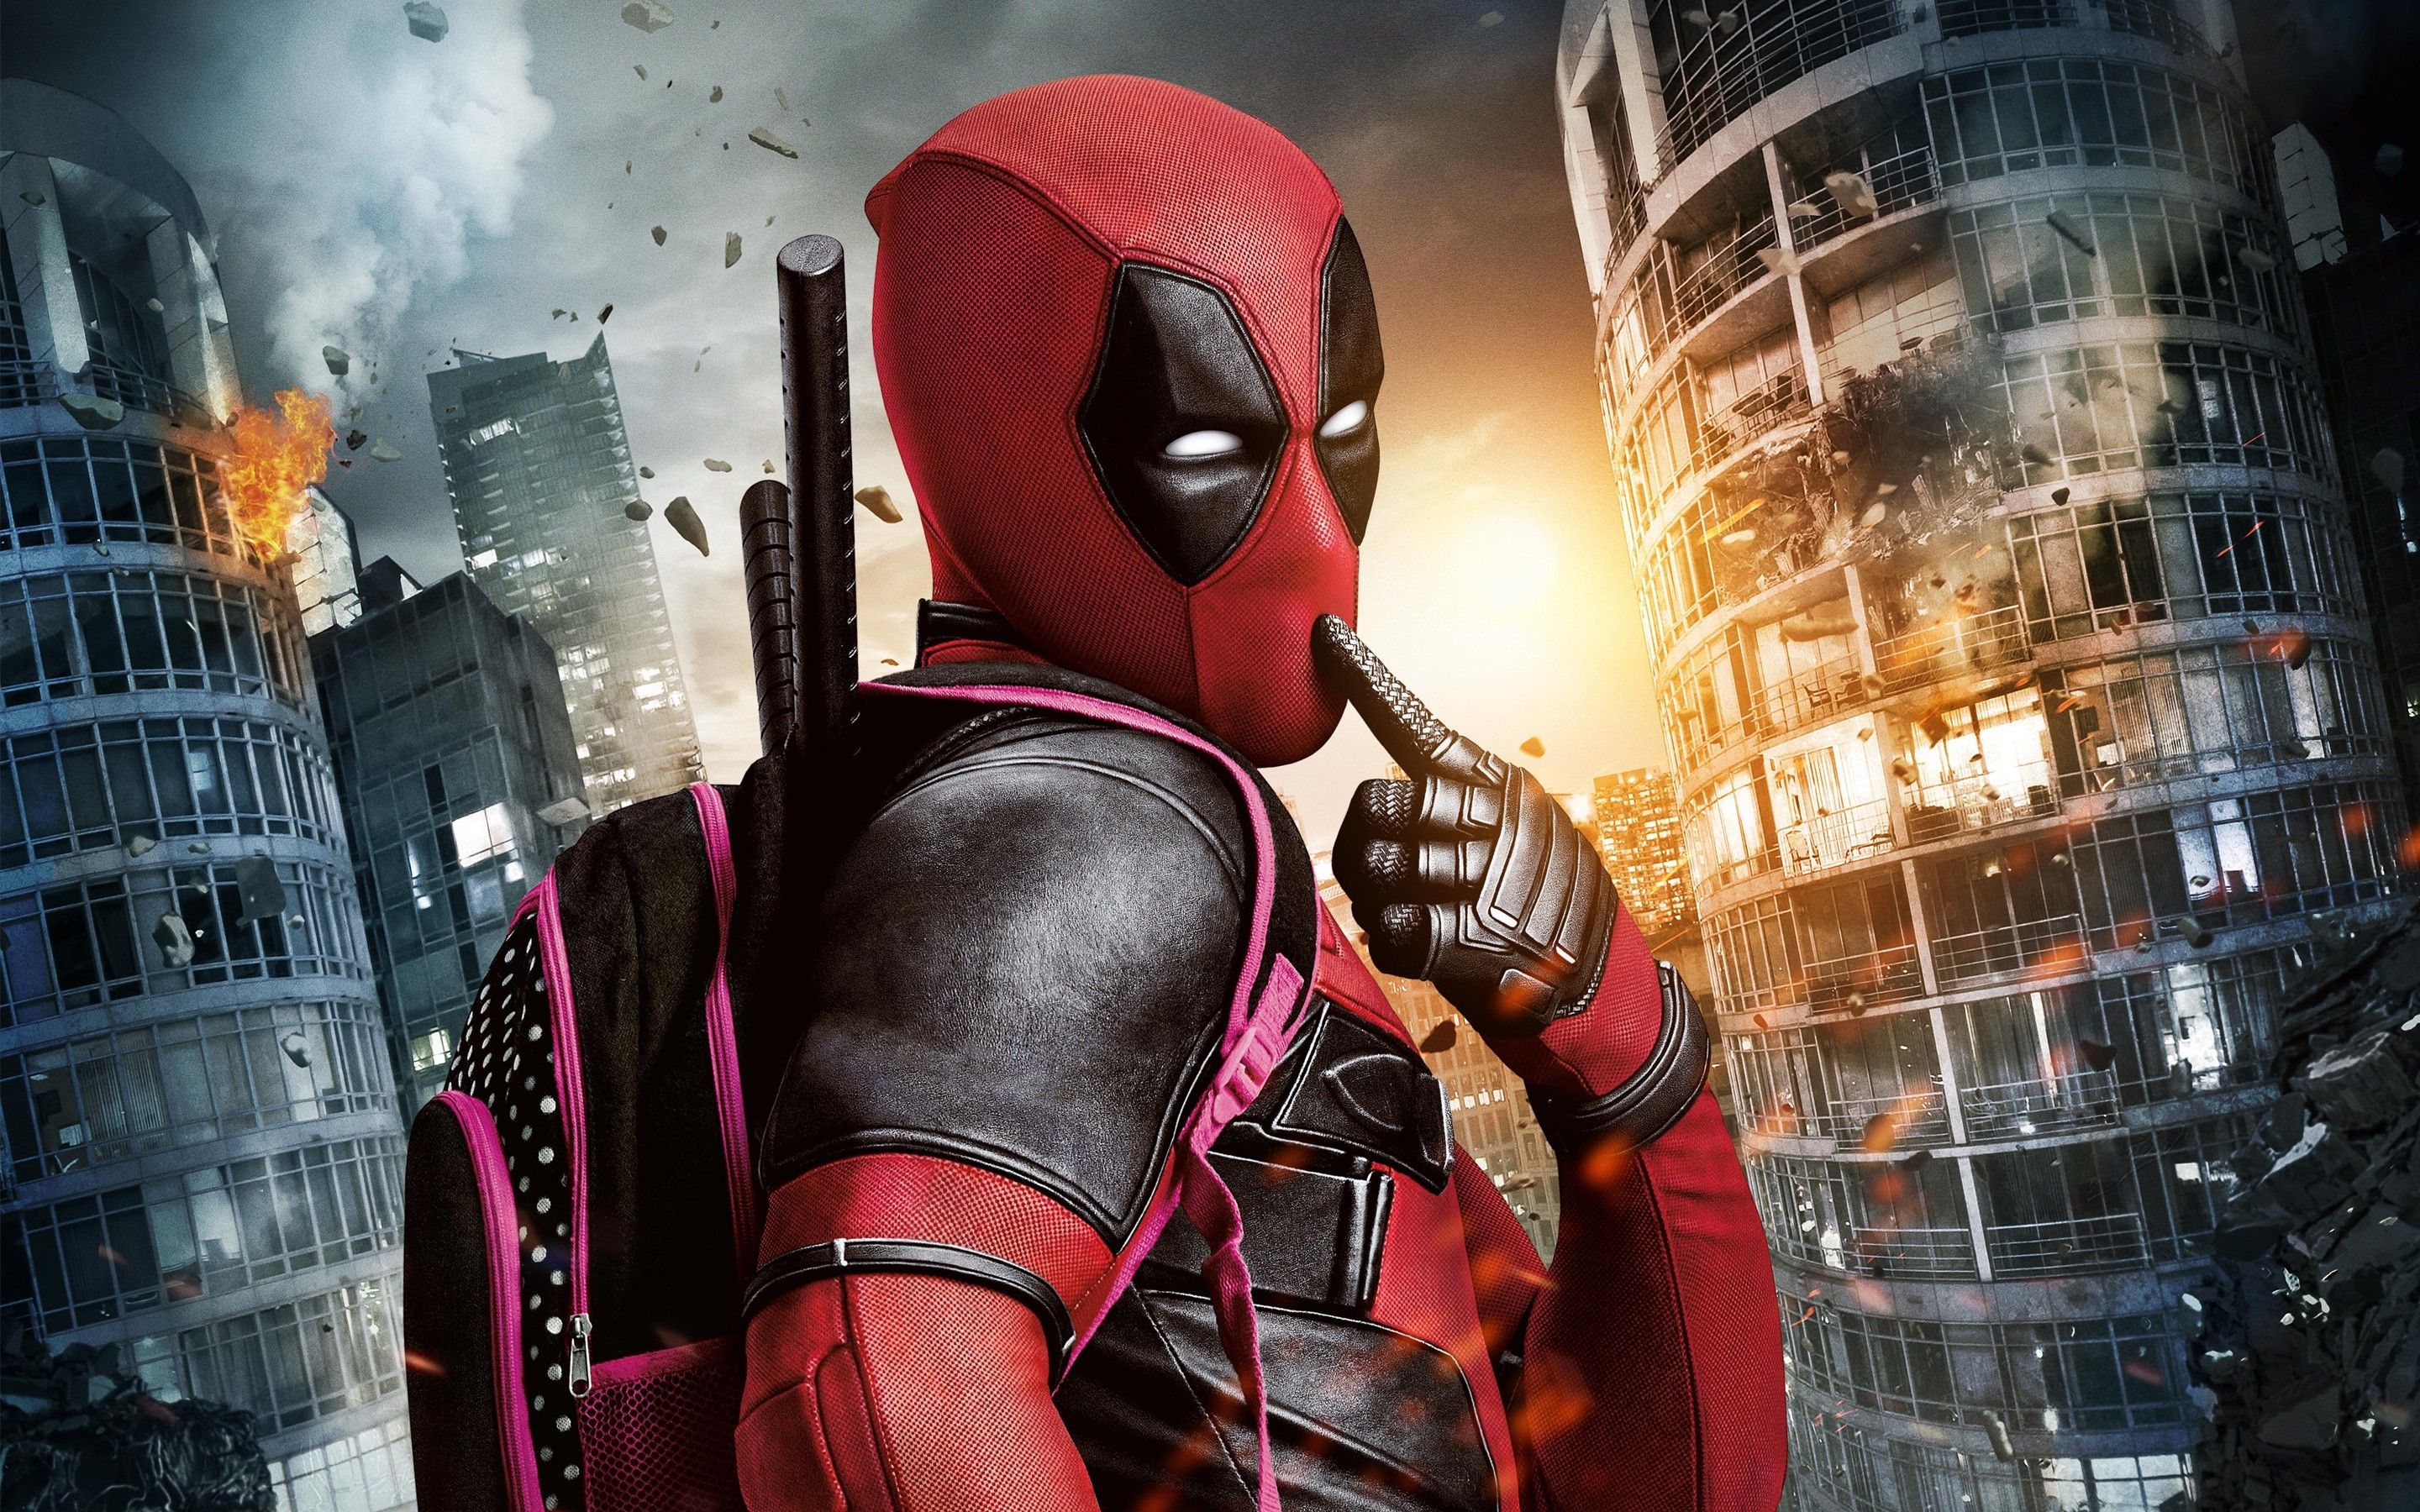 【Deadpool Wallpaper】. Background Picture & Image Just Get It